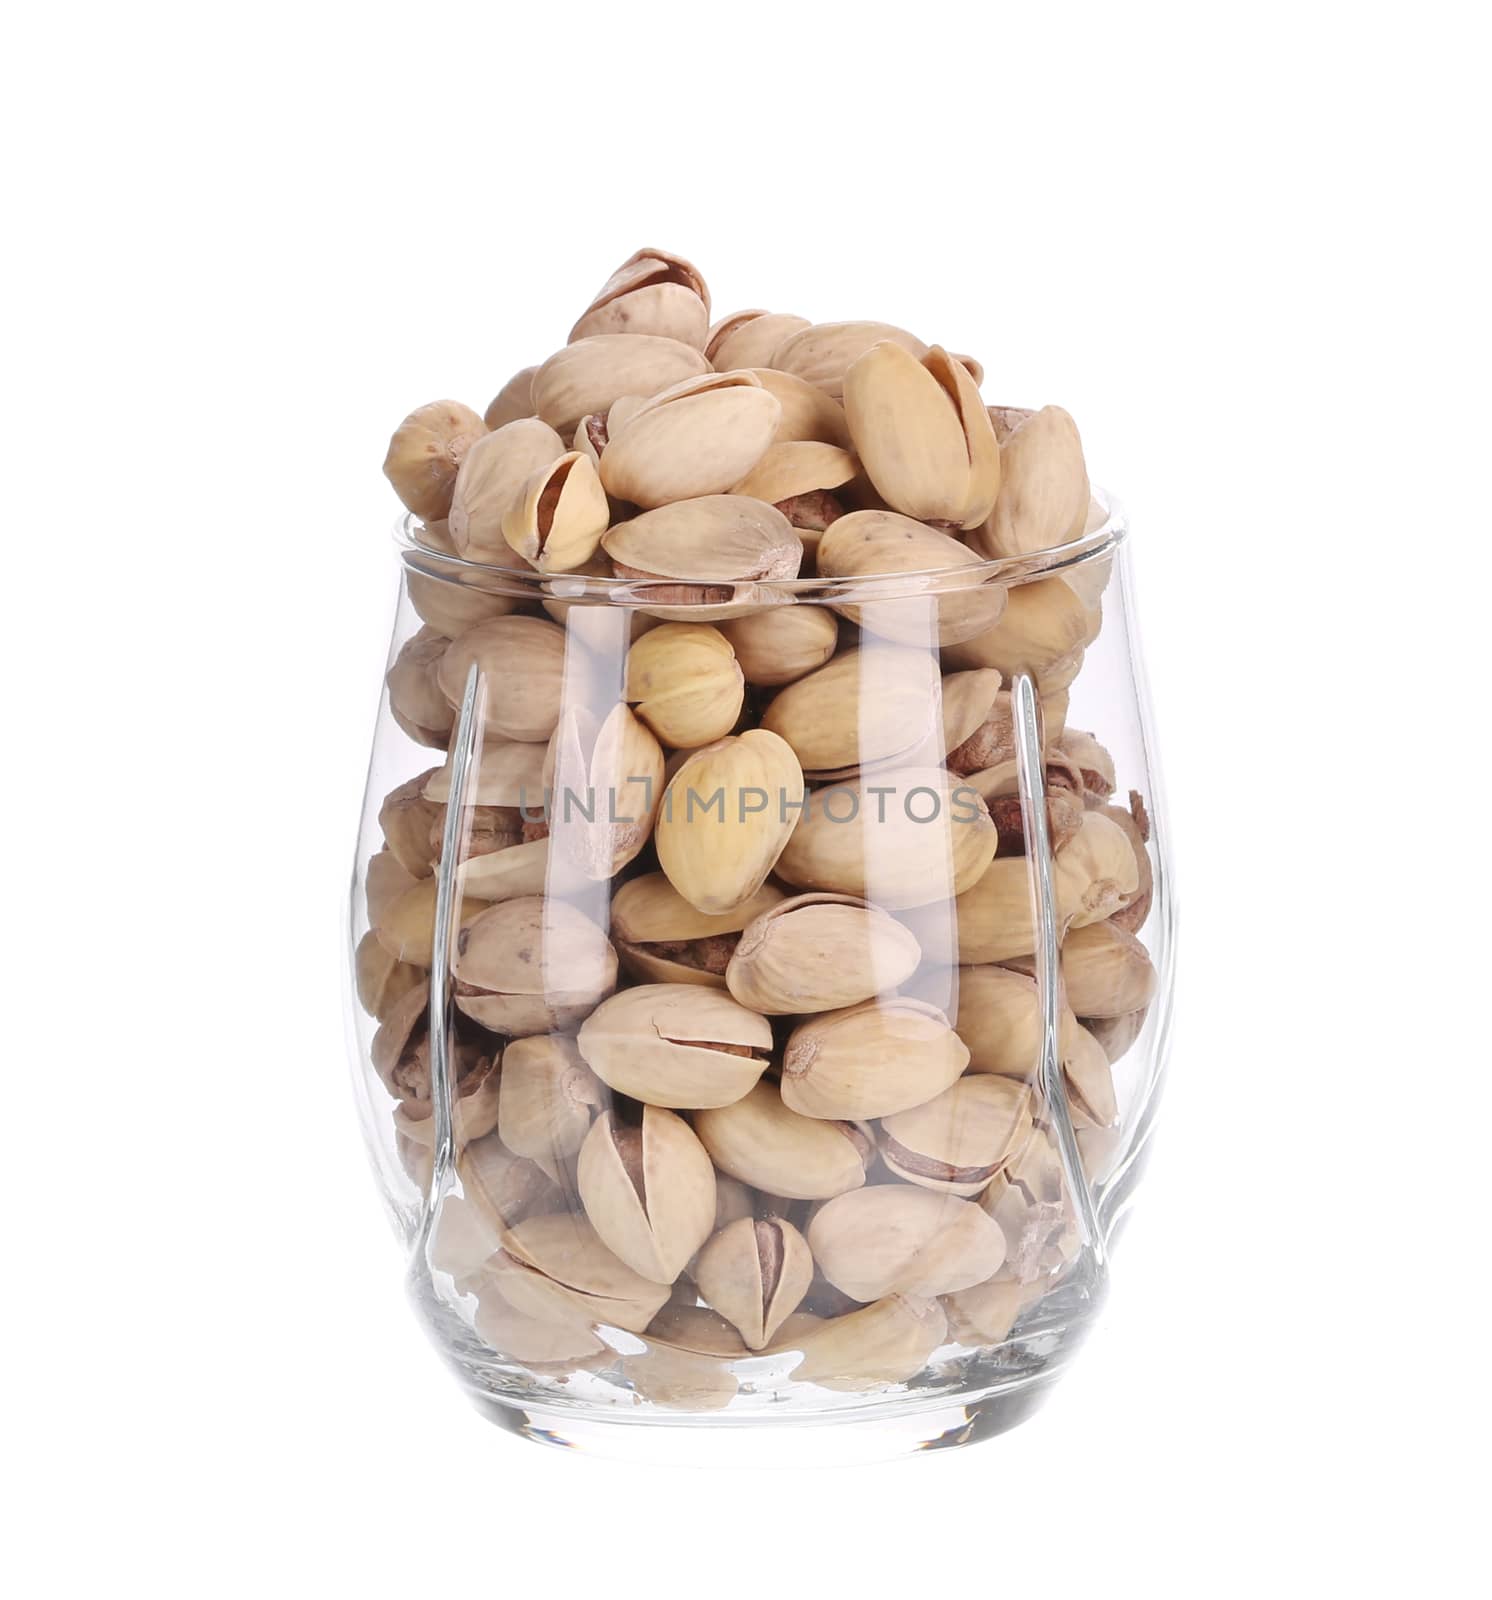 Glass with pistachios. Isolated on a white background.